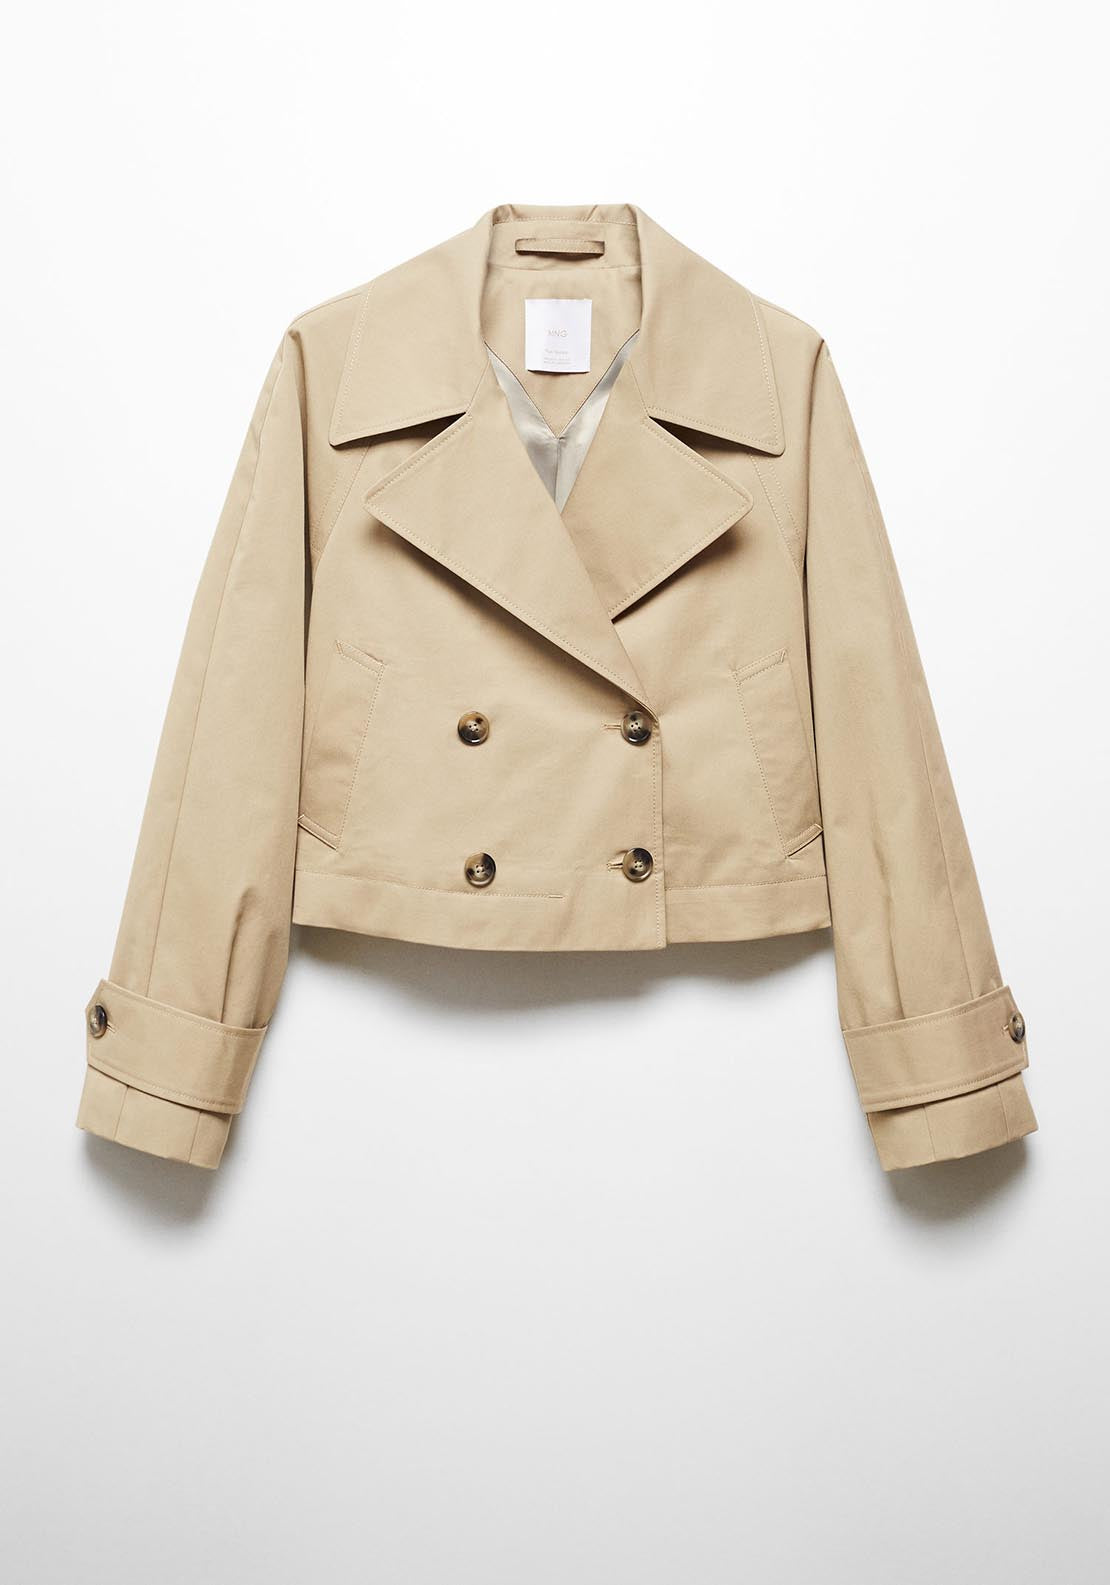 Mango Cropped trench coat with lapels 8 Shaws Department Stores